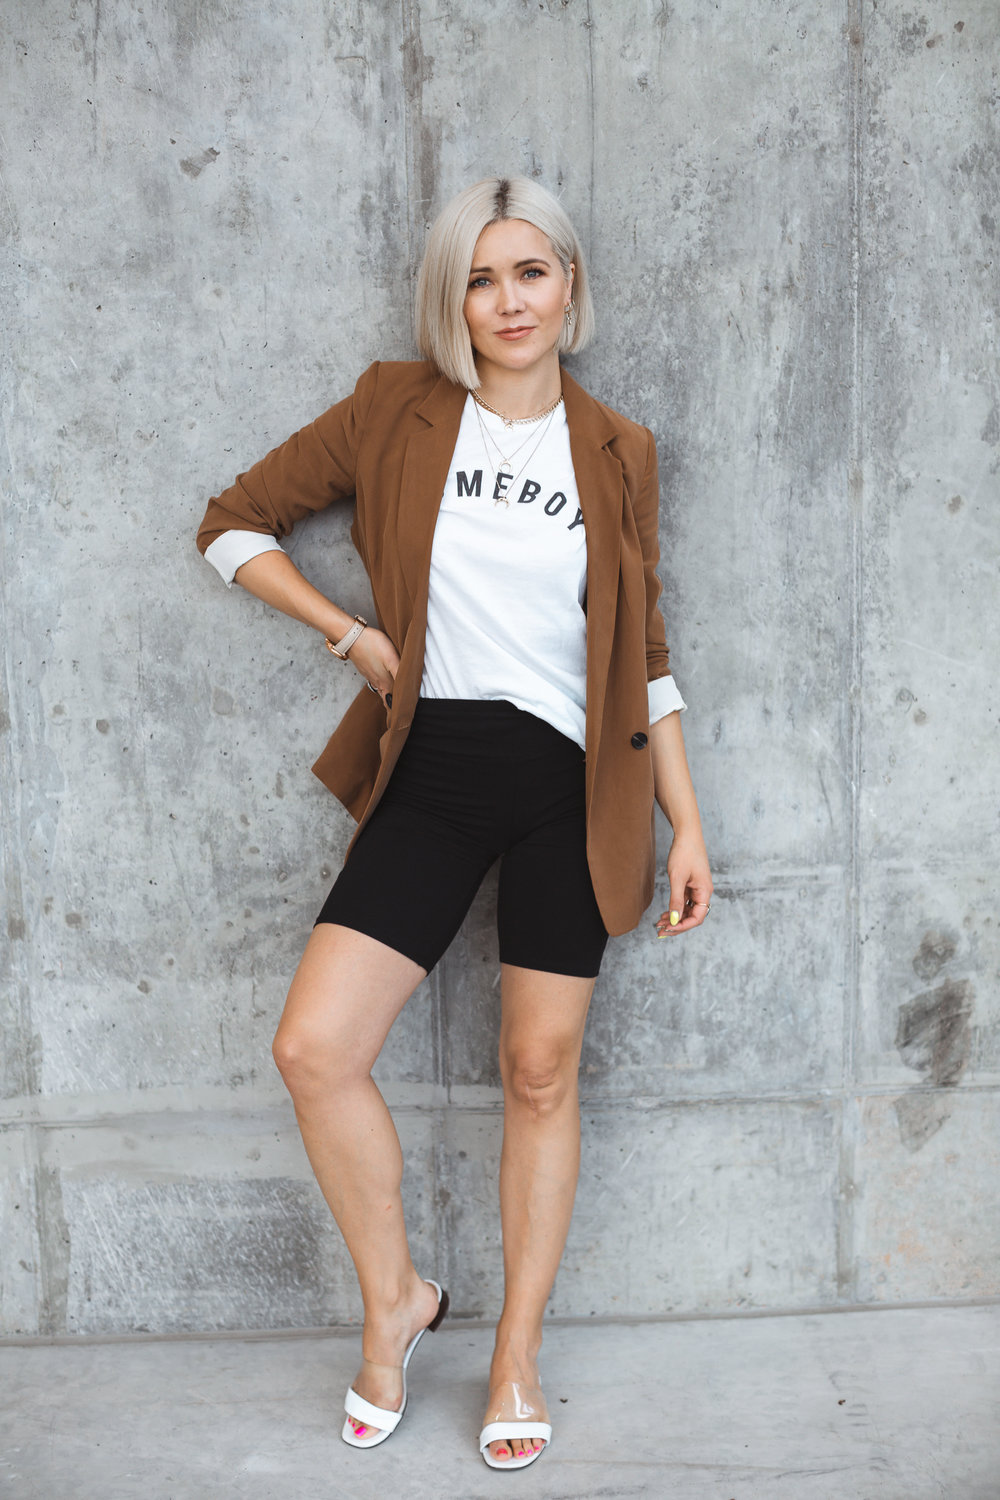 Copy of blonde woman in a brown blazer leaning against a concrete wall